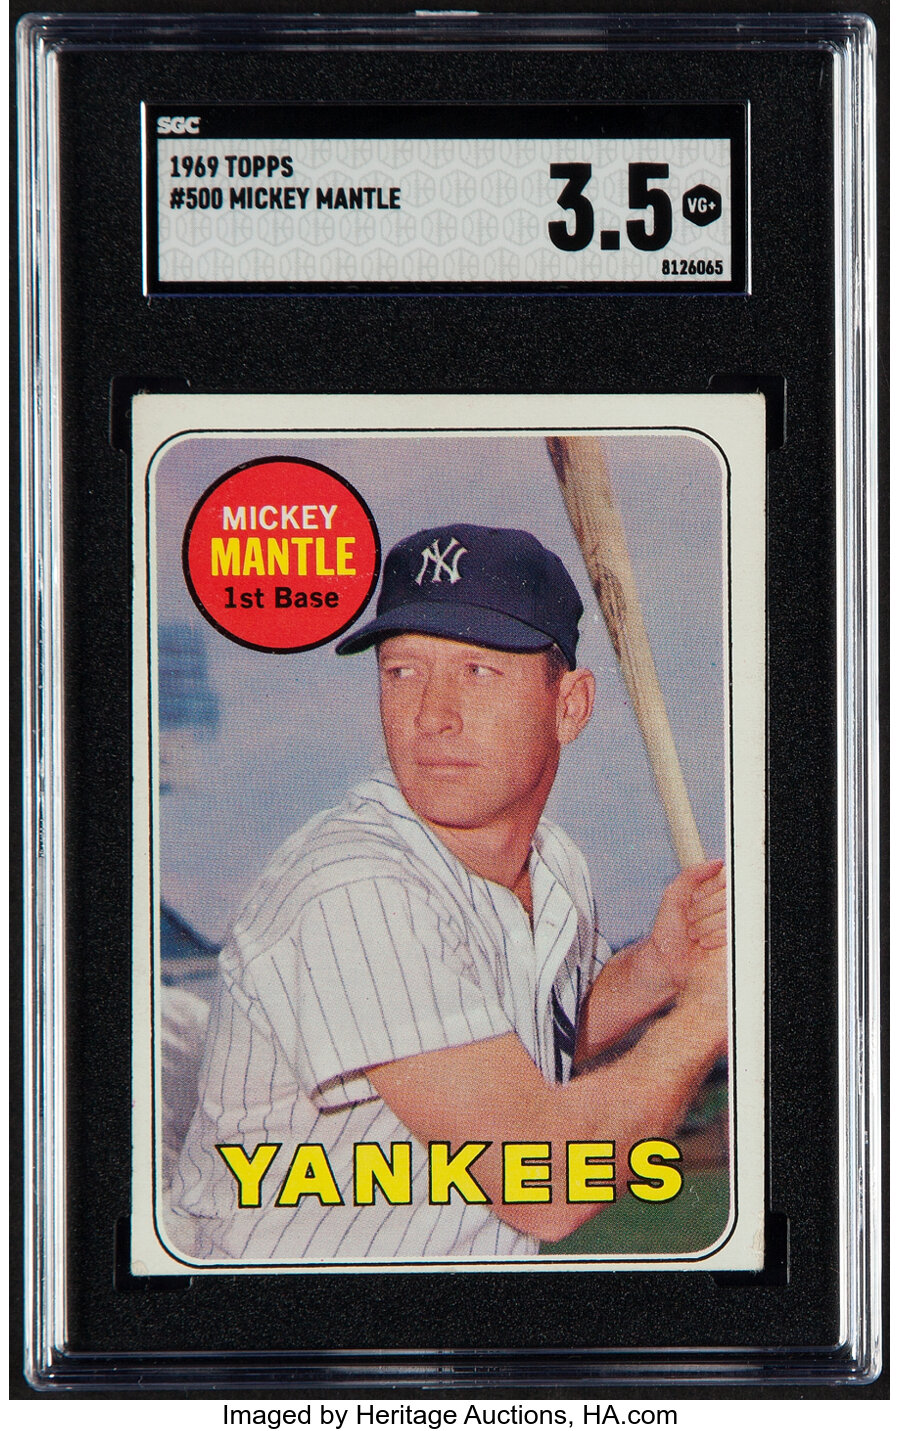 1969 Topps Mickey Mantle (Last Name In Yellow) #500 SGC VG+ 3.5